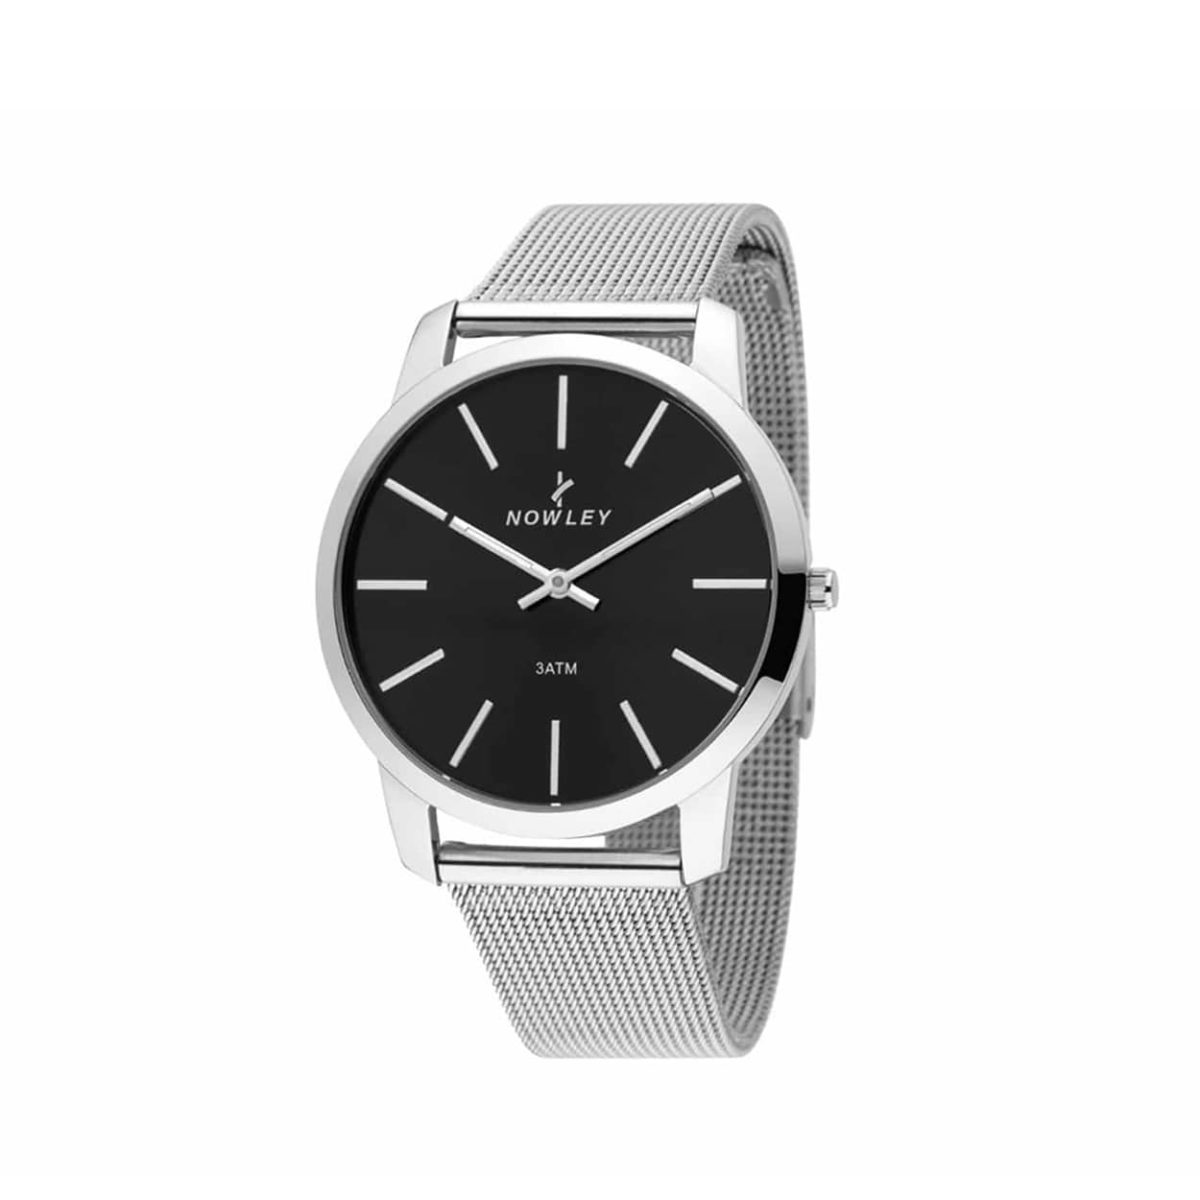 Nowley Silver and Black Stainless Steel Bracelet Men's Watch - 8-7010-0-3